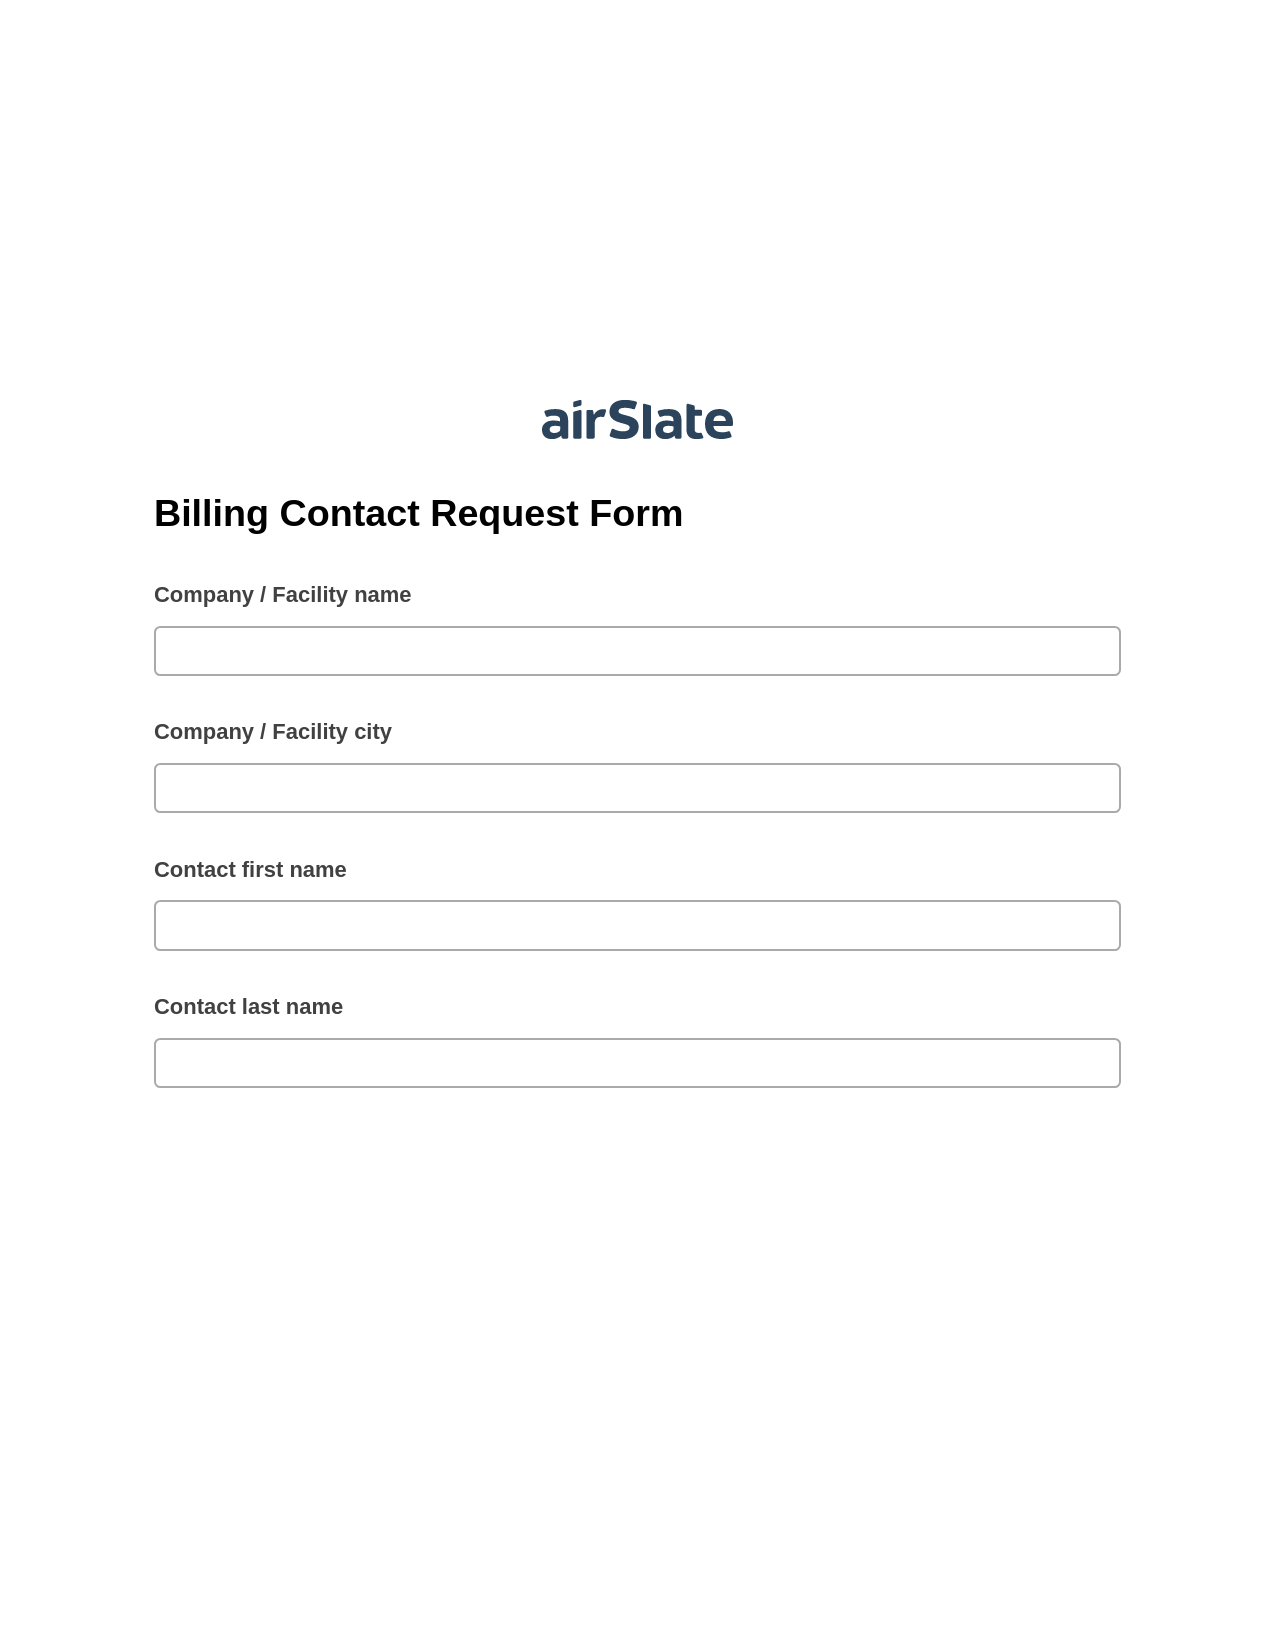 Multirole Billing Contact Request Form Pre-fill Dropdowns from Google Sheet Bot, Unassign Role Bot, Export to Salesforce Bot